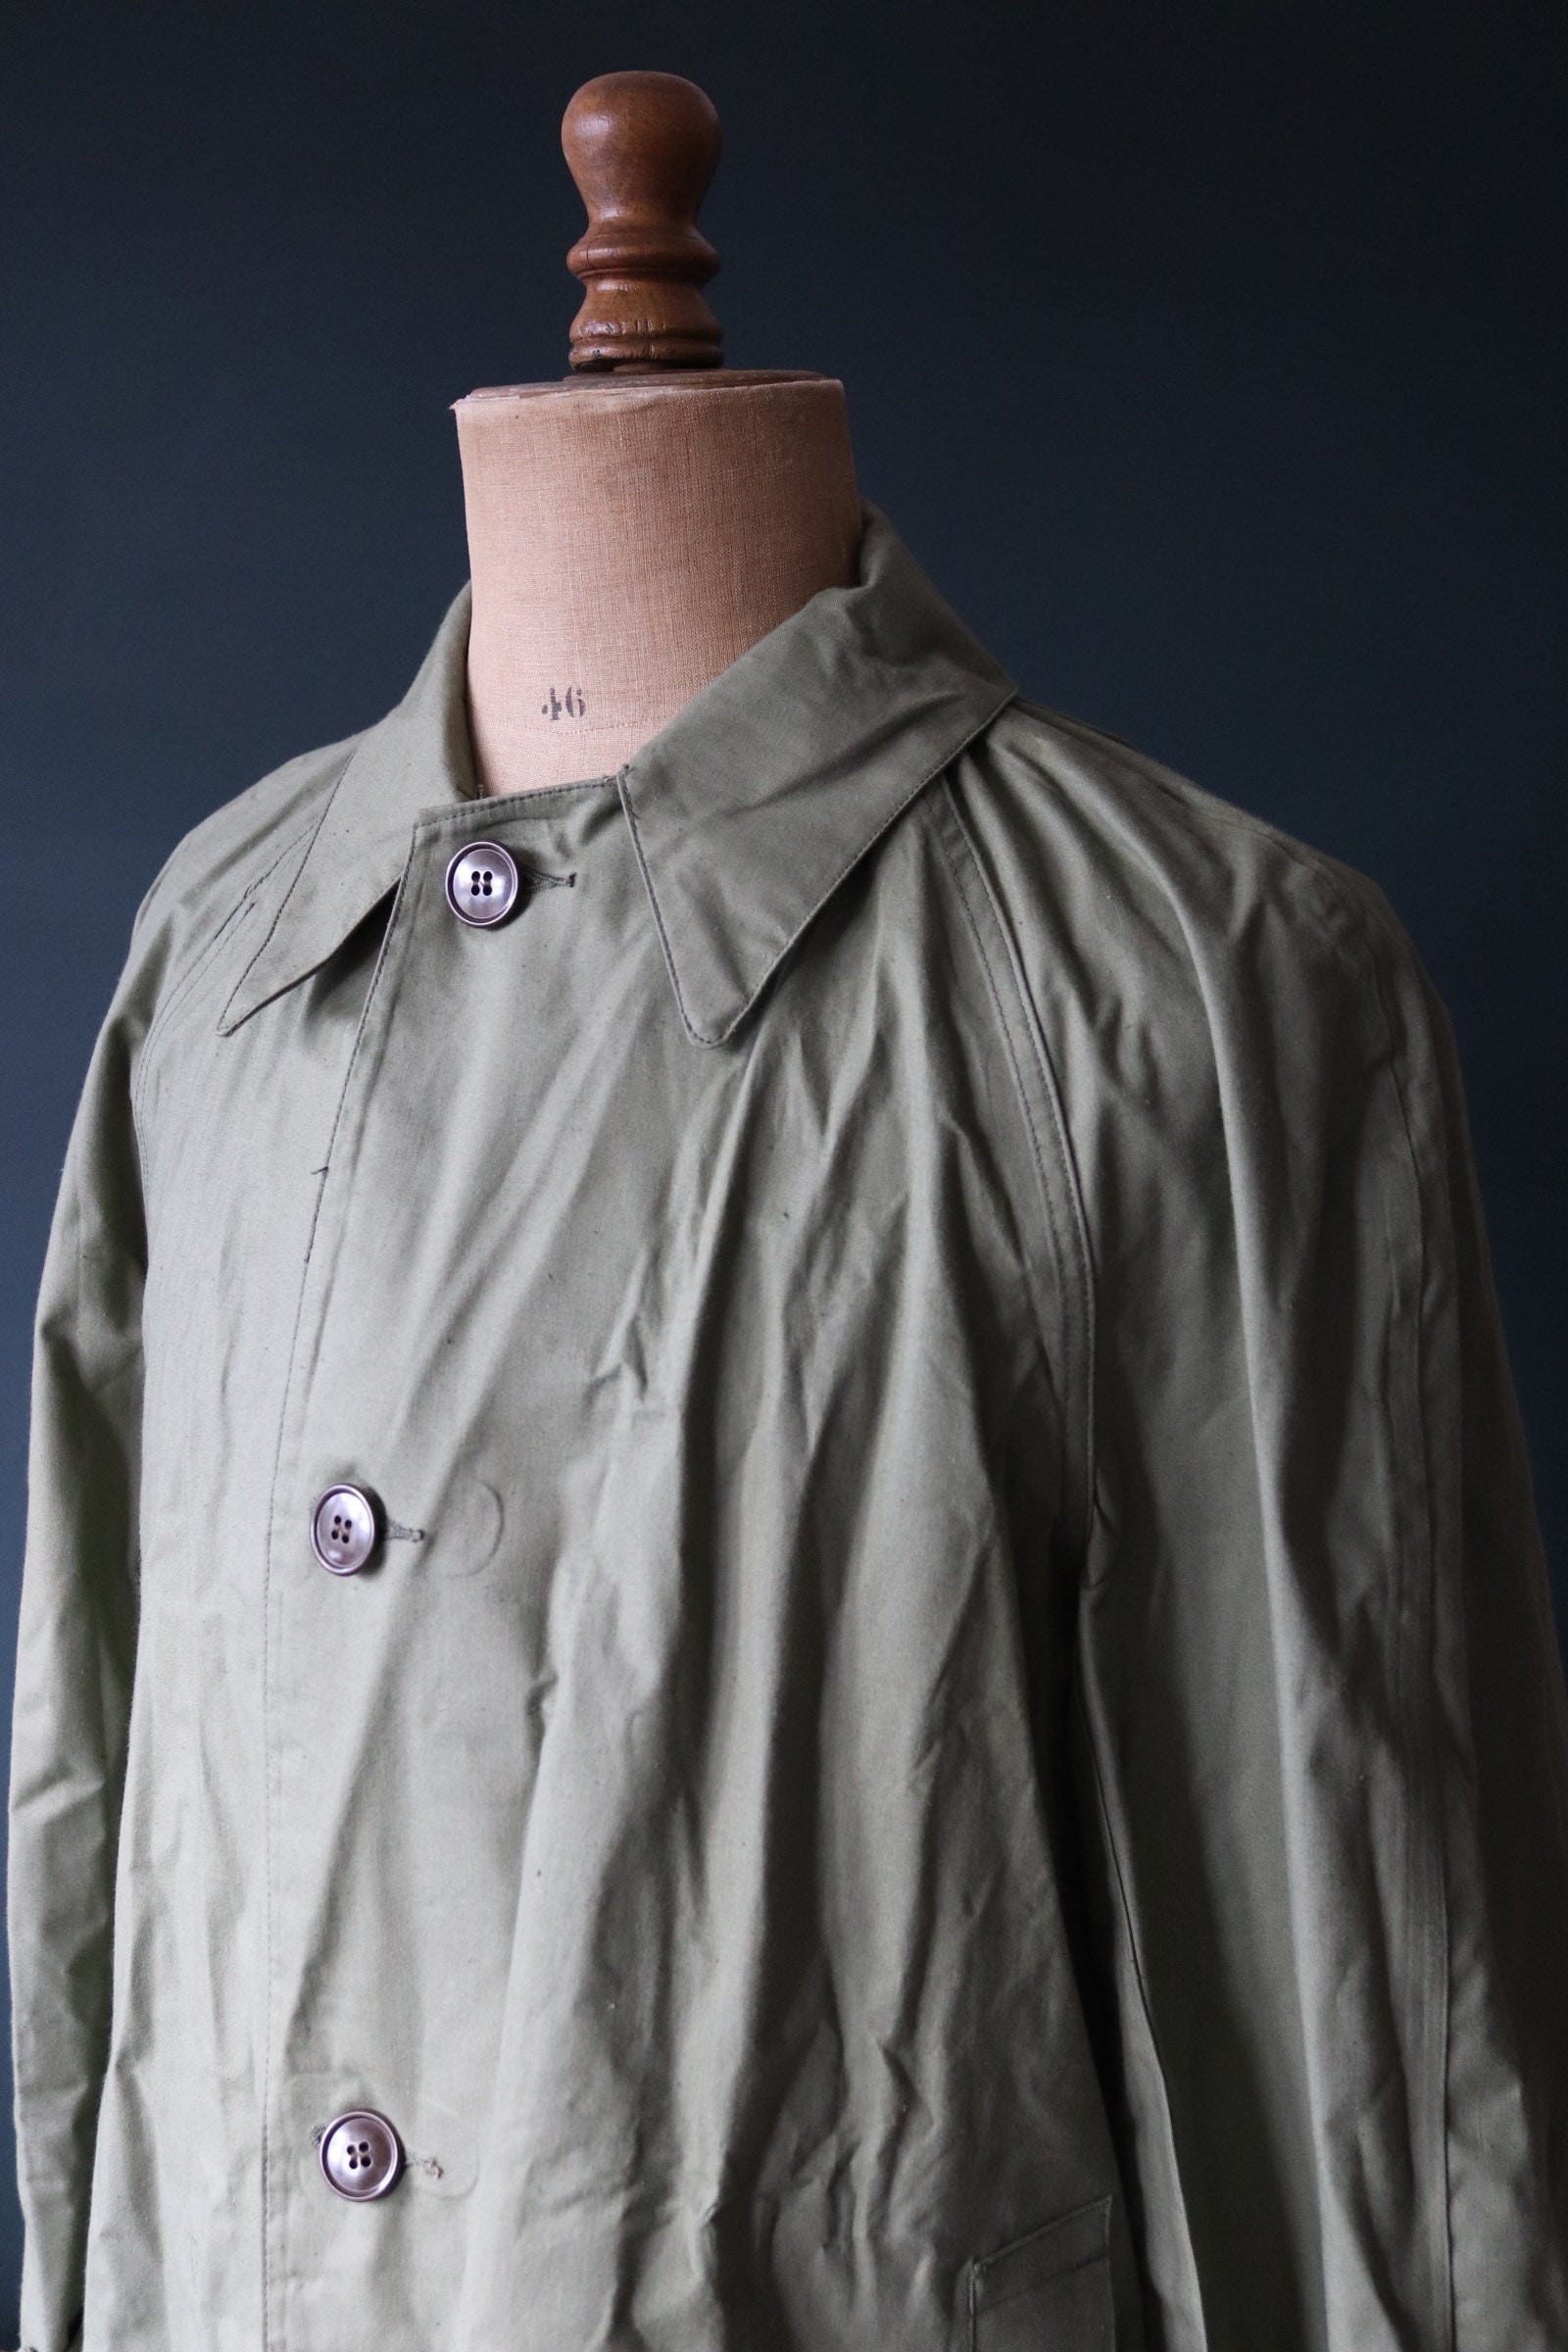 Vintage 1950s 50s French army military khaki green rubberised cotton ...